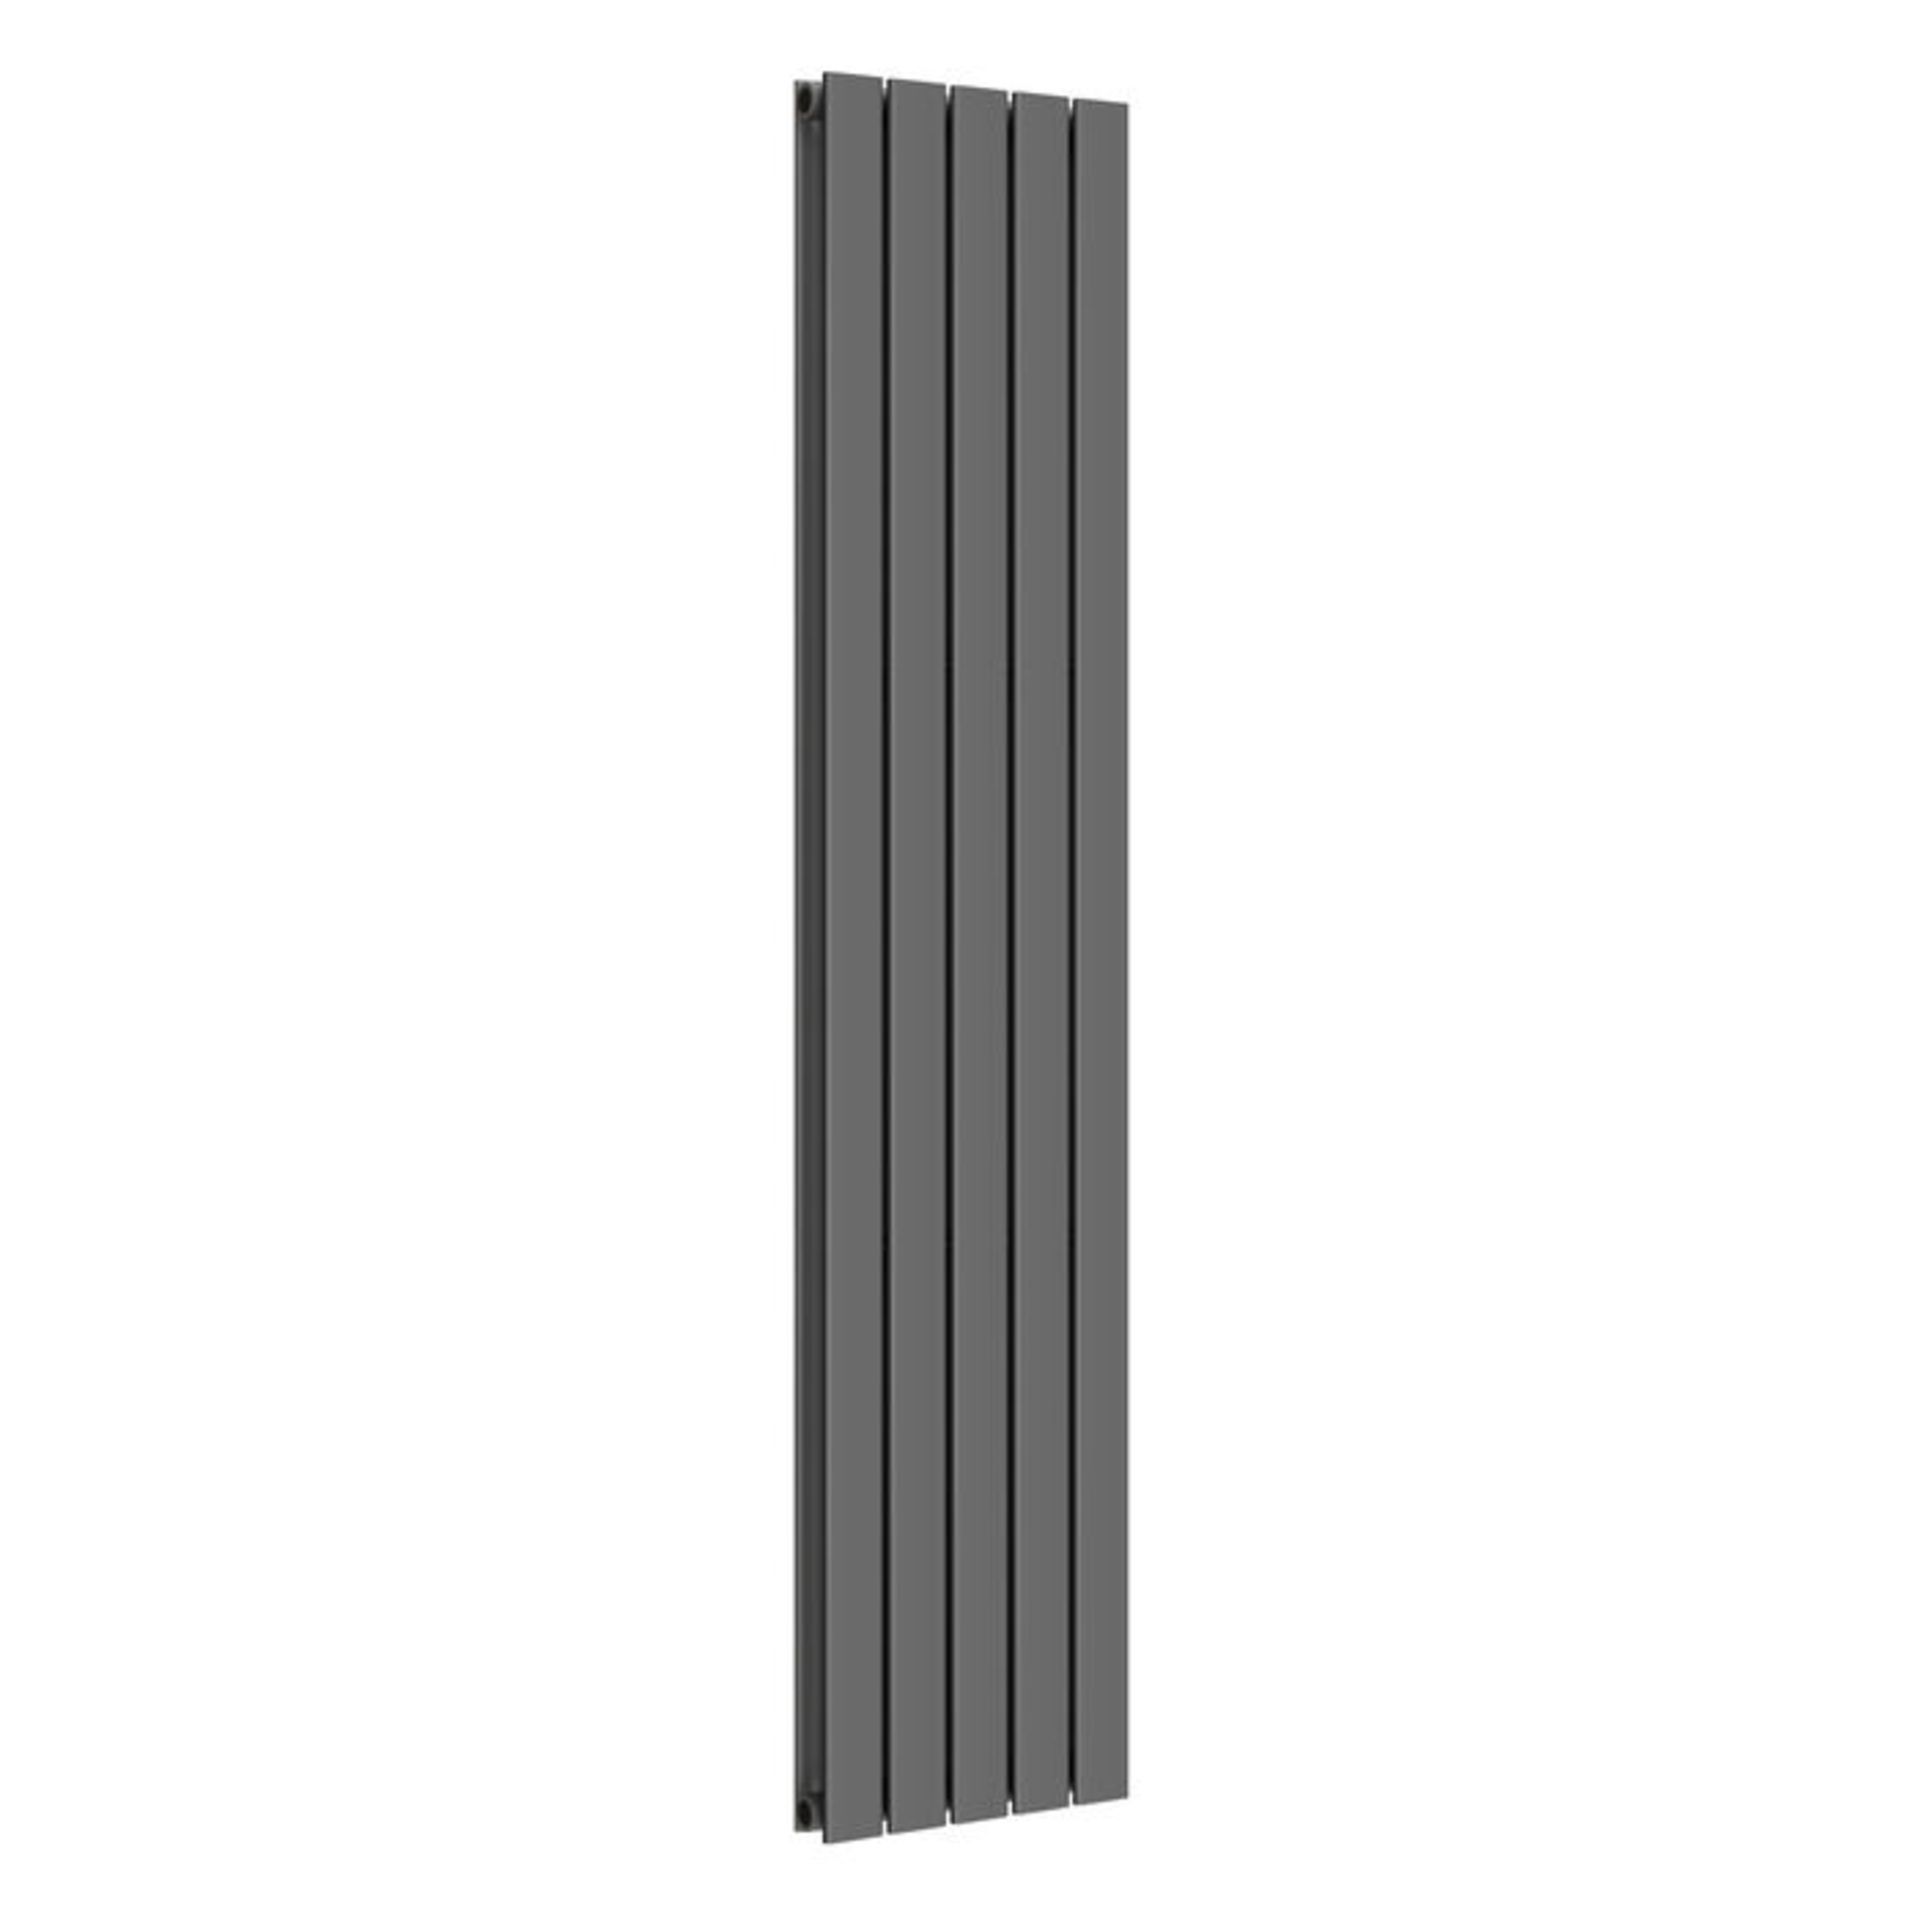 New Boxed 1800x360mm Anthracite Single Flat Panel Vertical Radiator. RRP £364.99.Ara6/1800Sa.... - Image 2 of 2